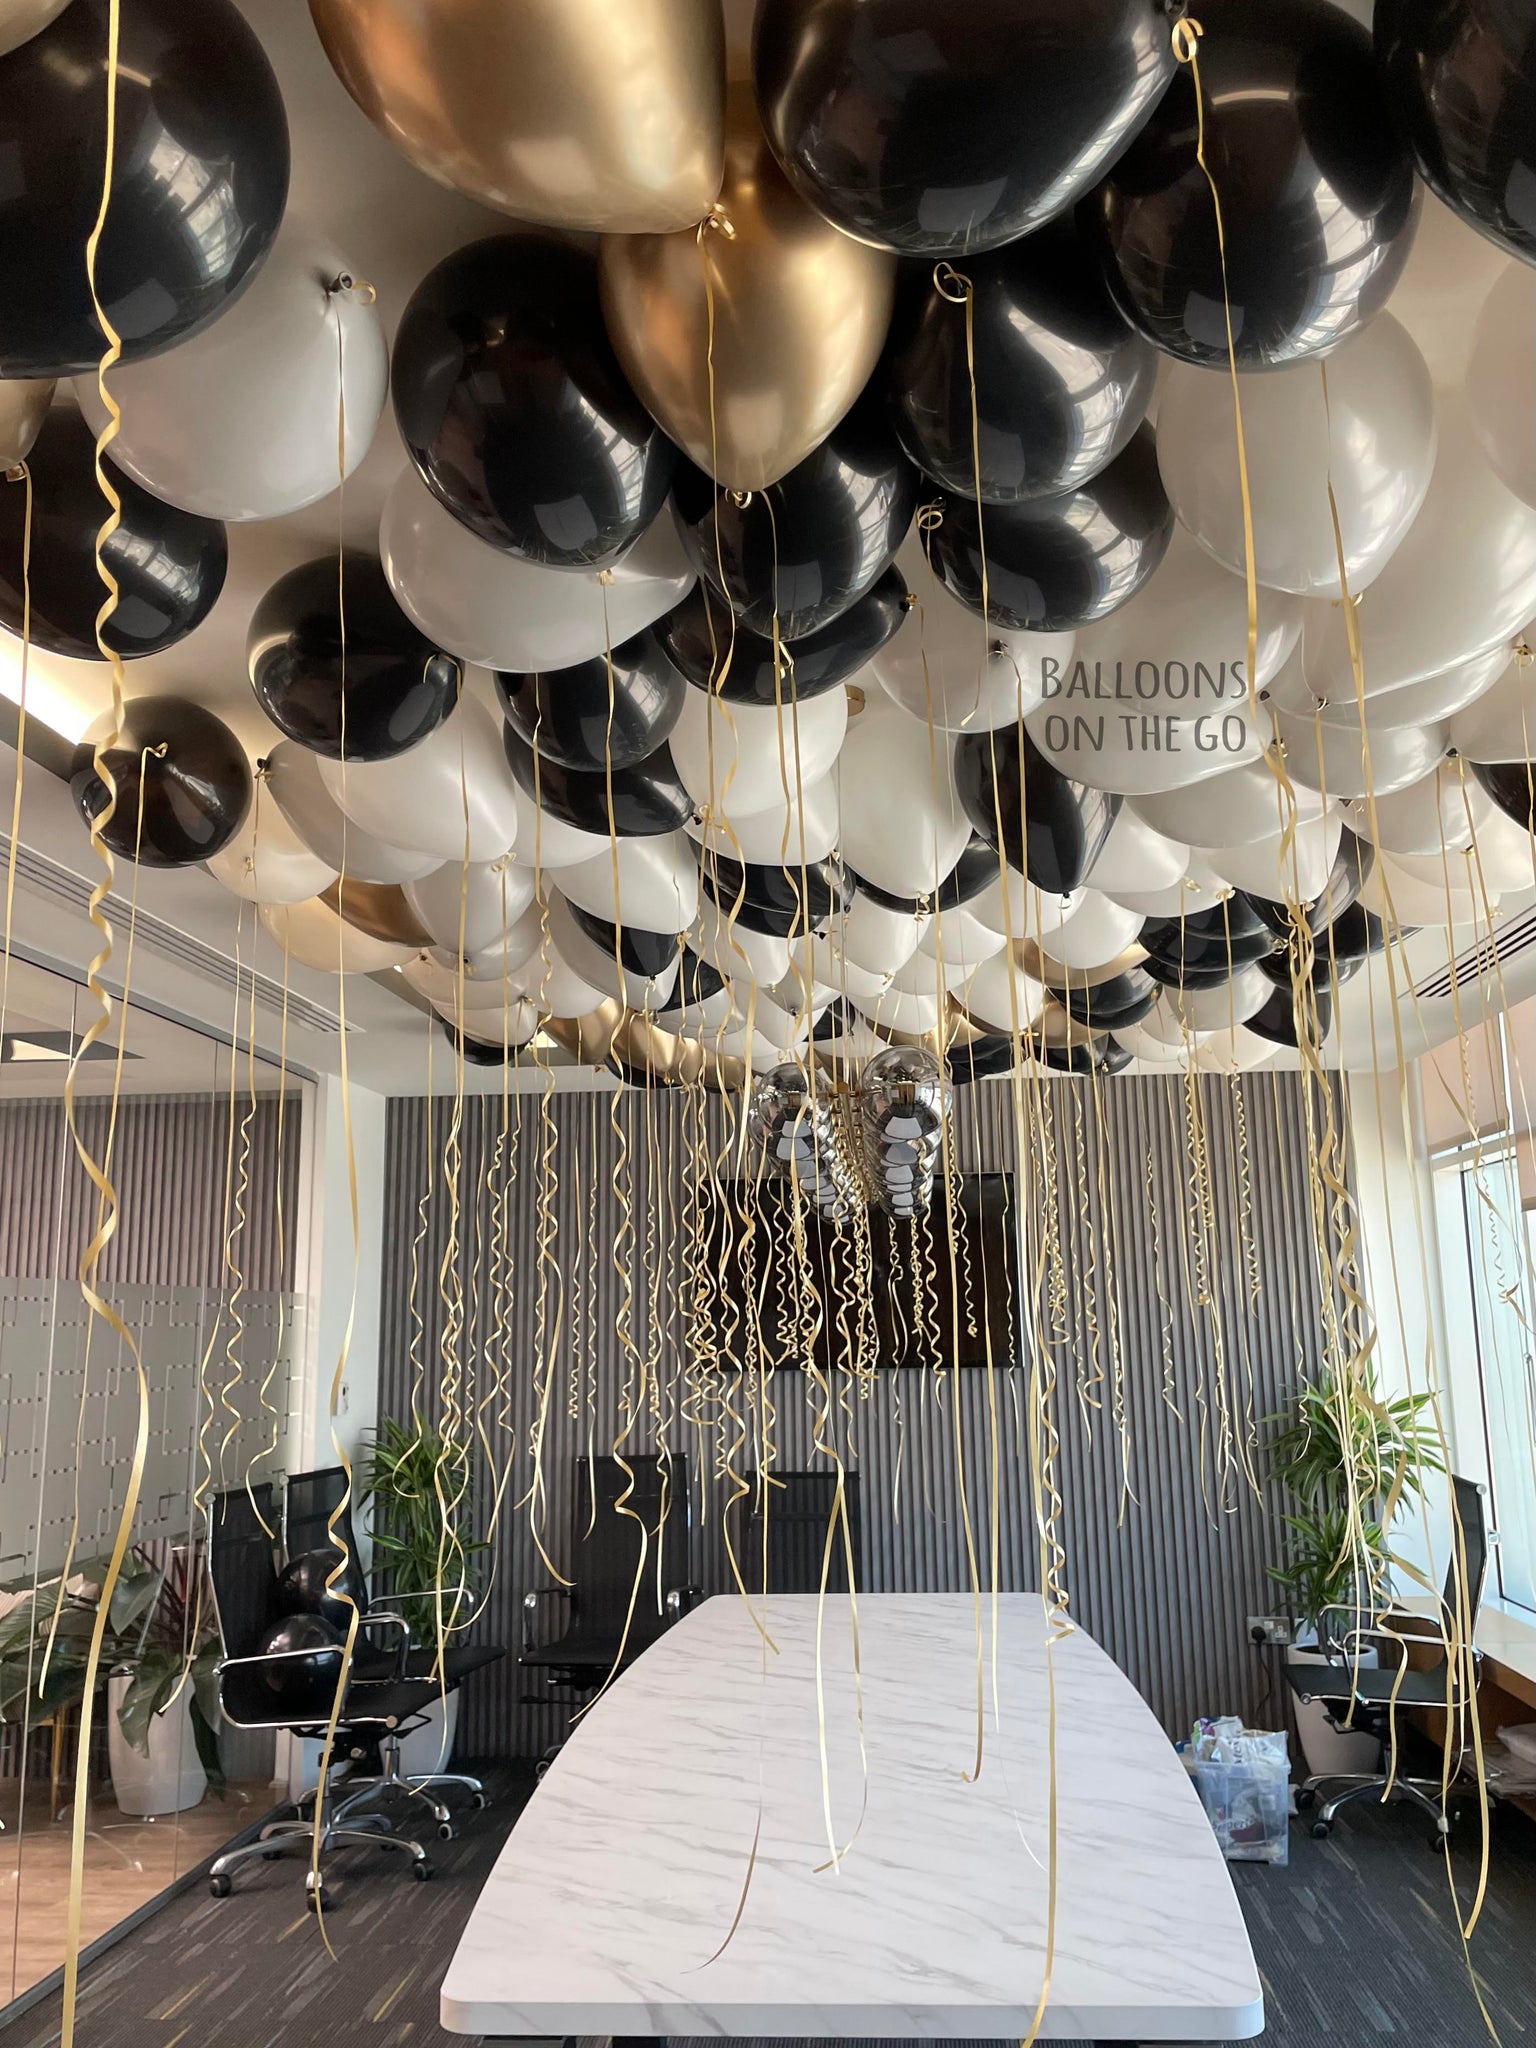 100 Ceiling Balloons for New Years